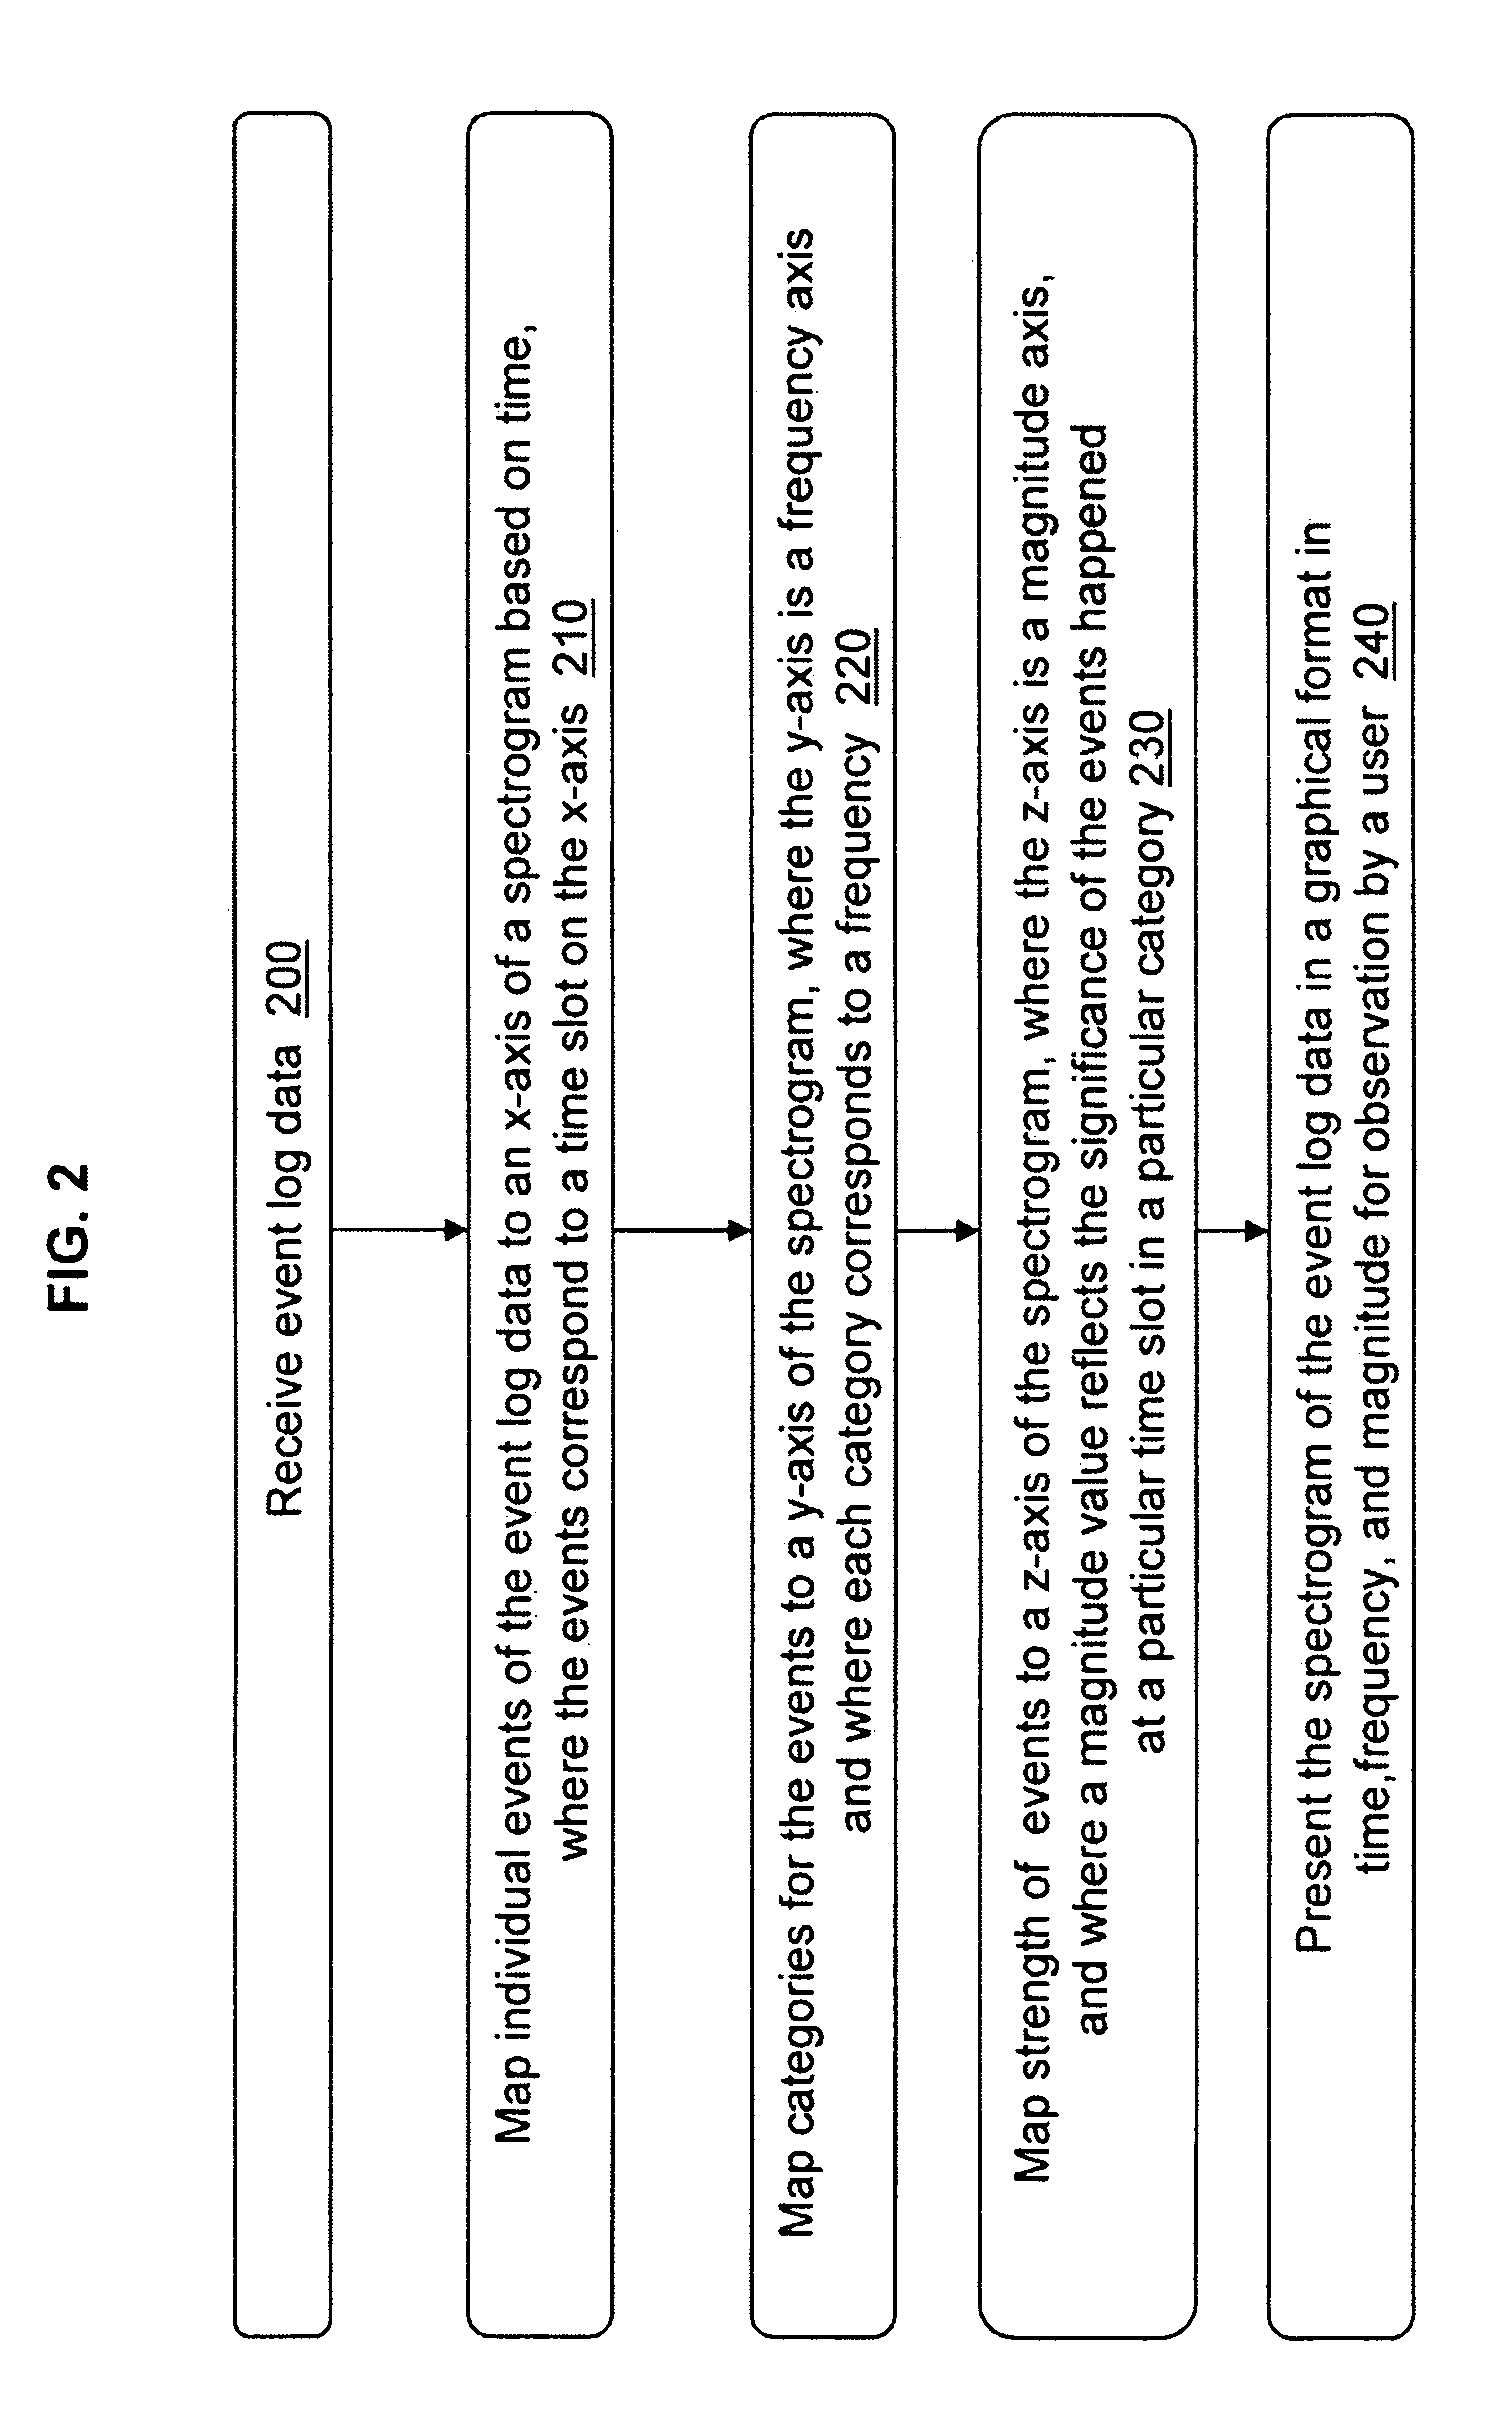 Methods for utilizing human perceptual systems for processing event log data